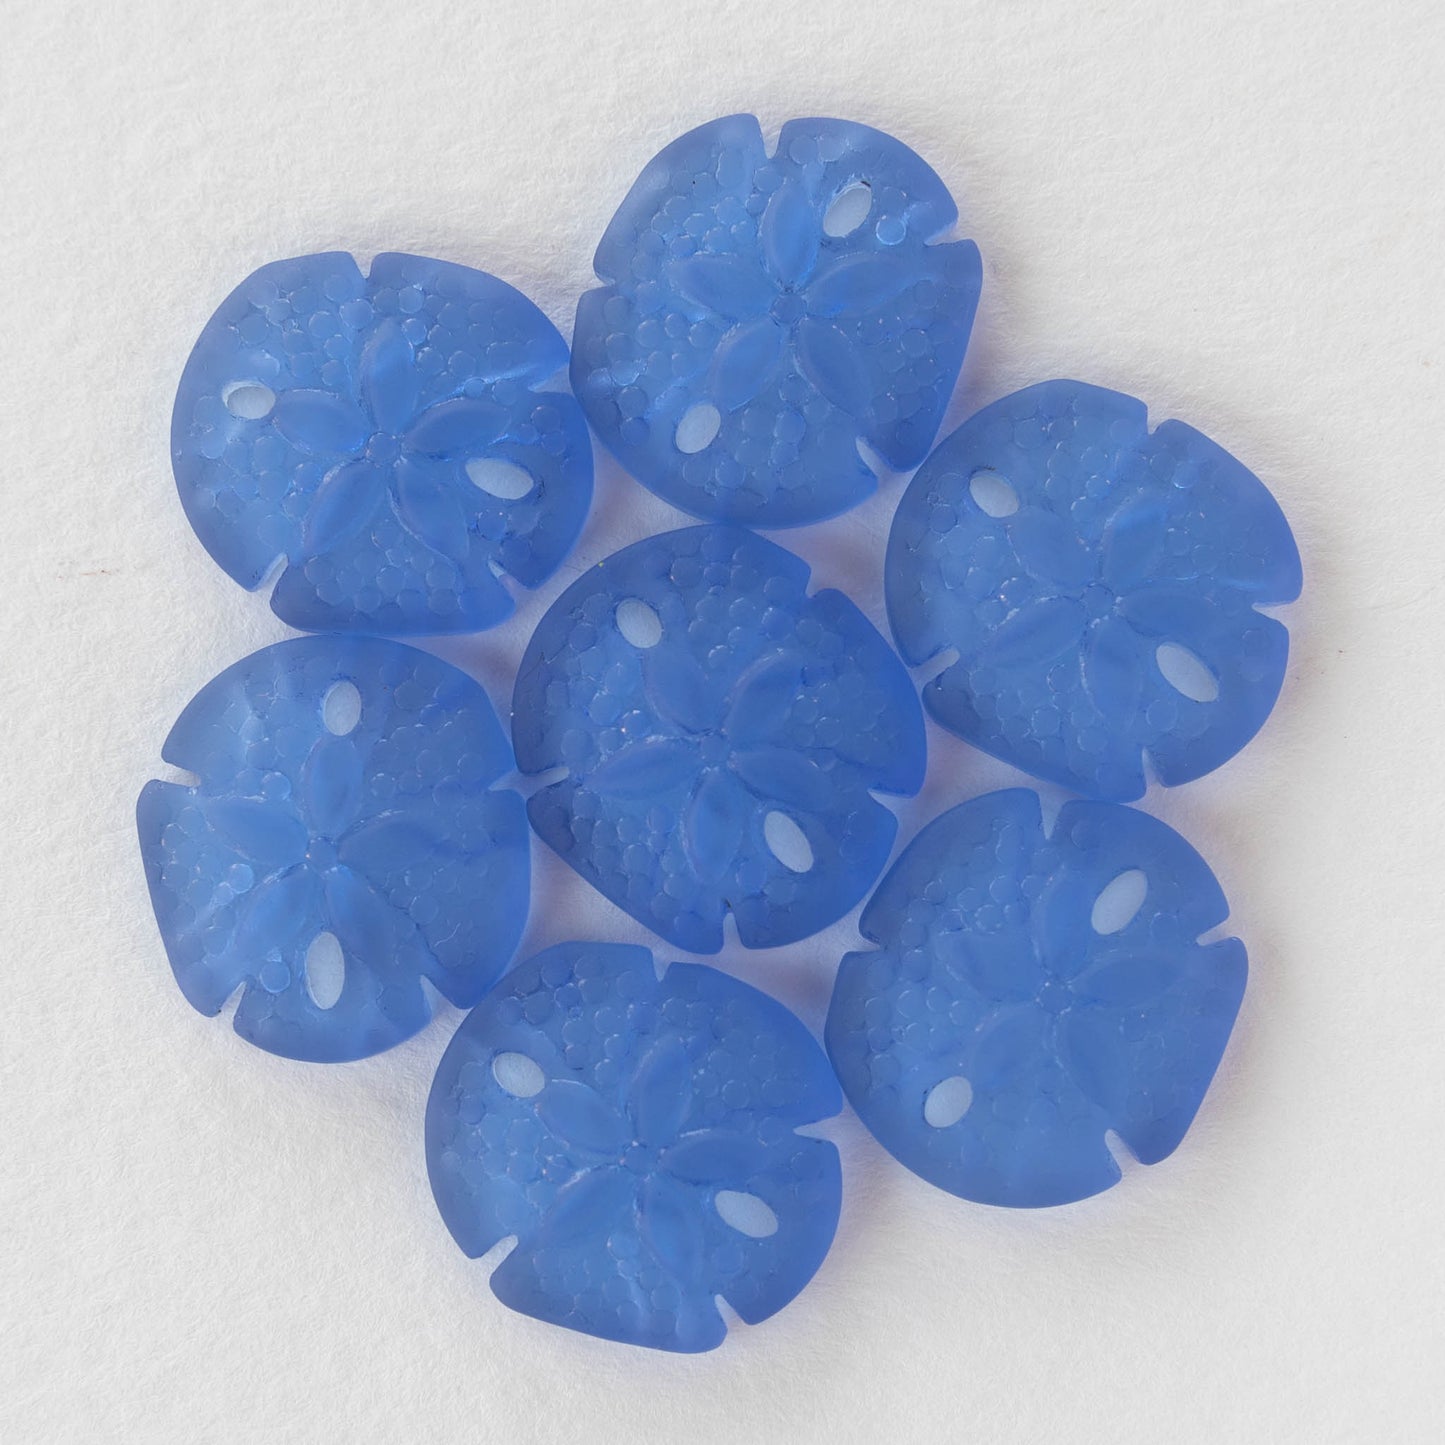 Load image into Gallery viewer, Glass Sand Dollar Beads - Sapphire Blue - 4 Beads
